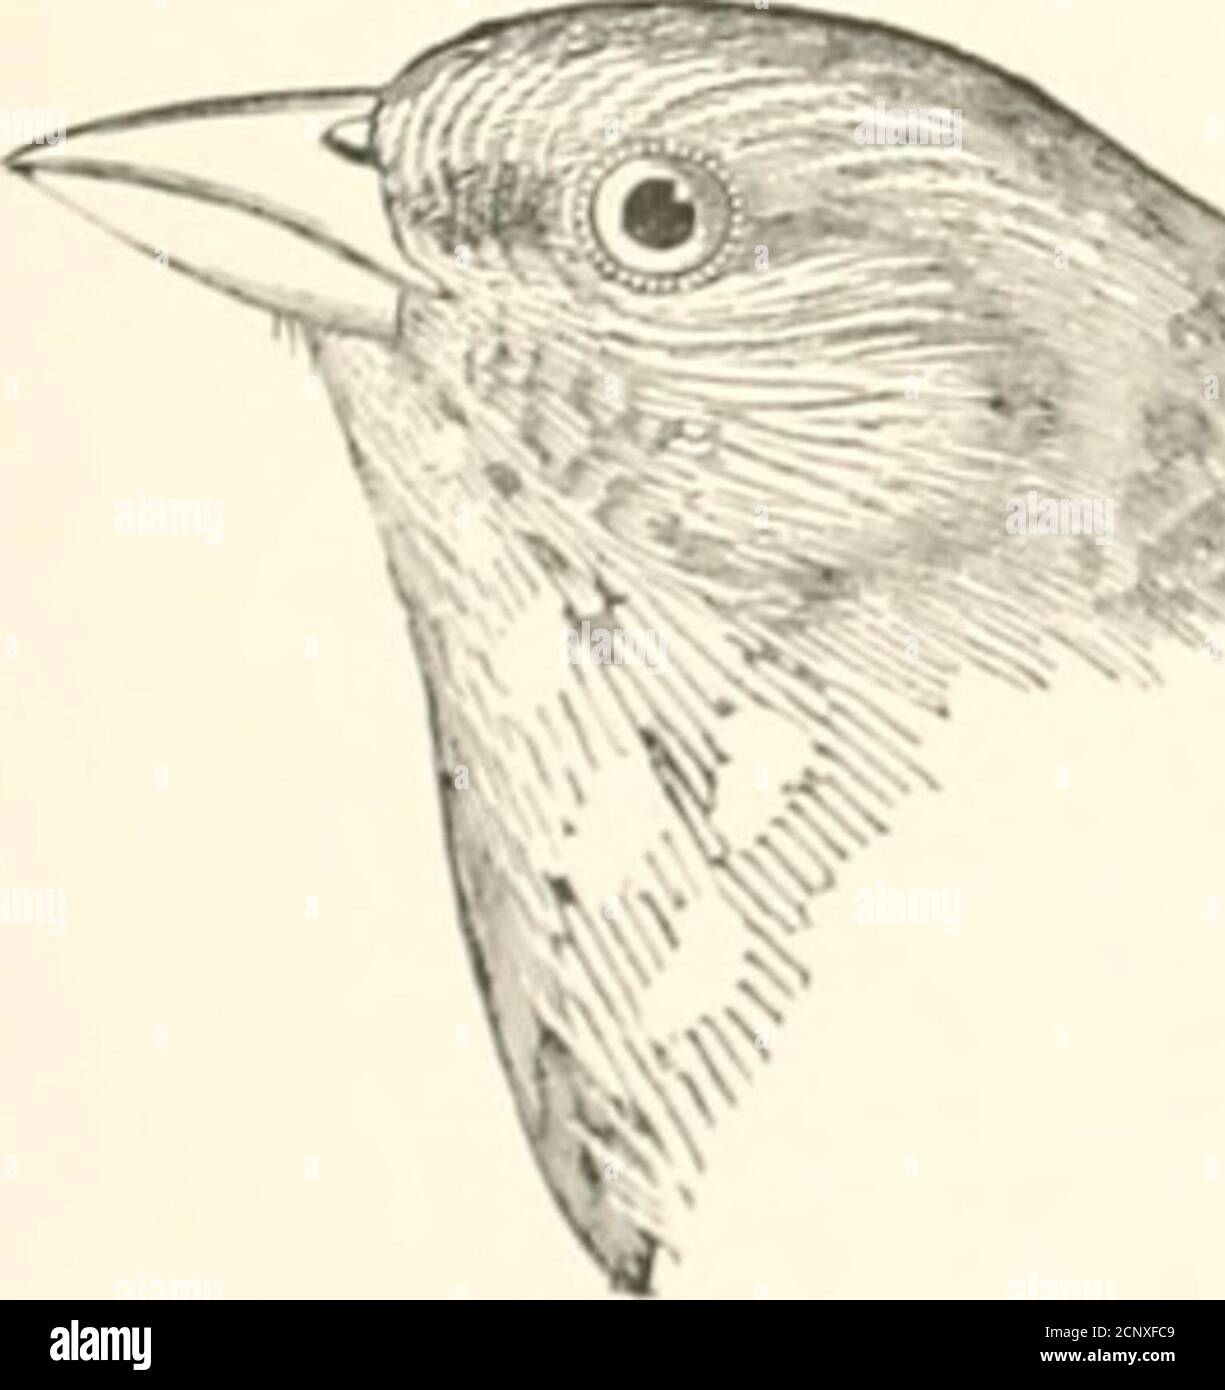 . The birds of eastern North America known to occur east of the nineteenth meridian .. . V^ ^: Crown, grayish, without tawny stripe inmiddle; car coveits, gray; hack, olive andgray; a distinct superciliary stripe of buff oryellowish. Sharp-tailed Sparrow.Ammodramus caudac^Uus, awl races.See No. 414.. Crown and back, rufous brown, tlie feathers,more or less marked with black, and cd^^cdwith gray; not tawny stripe on middle ofcrown; tail tVathers. not pointed; tail, over2.25 lung. Pine-woods Sparrow.Penciva lOticalis, a»d rnSee No. 434. L&gt;38 KEY TO THE BIRDS OF EASTERN NORTH AMERICA. Part 5. Stock Photo